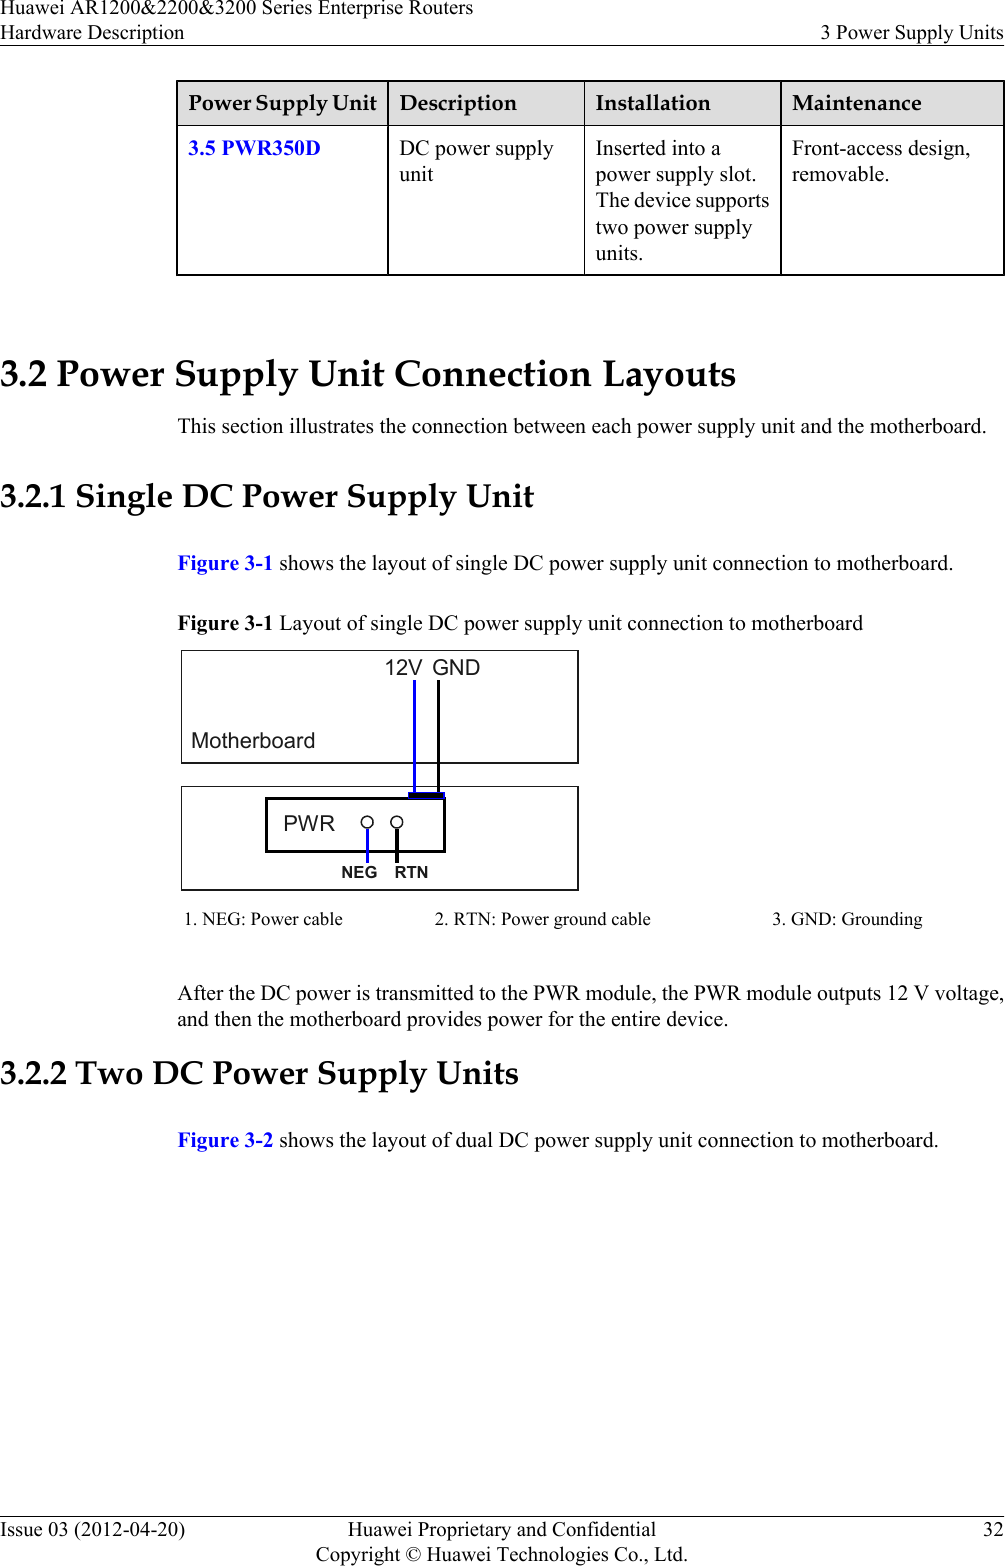 Power Supply Unit Description Installation Maintenance3.5 PWR350D DC power supplyunitInserted into apower supply slot.The device supportstwo power supplyunits.Front-access design,removable. 3.2 Power Supply Unit Connection LayoutsThis section illustrates the connection between each power supply unit and the motherboard.3.2.1 Single DC Power Supply UnitFigure 3-1 shows the layout of single DC power supply unit connection to motherboard.Figure 3-1 Layout of single DC power supply unit connection to motherboardMotherboardGND12VPWRNEG RTN1. NEG: Power cable 2. RTN: Power ground cable 3. GND: GroundingAfter the DC power is transmitted to the PWR module, the PWR module outputs 12 V voltage,and then the motherboard provides power for the entire device.3.2.2 Two DC Power Supply UnitsFigure 3-2 shows the layout of dual DC power supply unit connection to motherboard.Huawei AR1200&amp;2200&amp;3200 Series Enterprise RoutersHardware Description 3 Power Supply UnitsIssue 03 (2012-04-20) Huawei Proprietary and ConfidentialCopyright © Huawei Technologies Co., Ltd.32